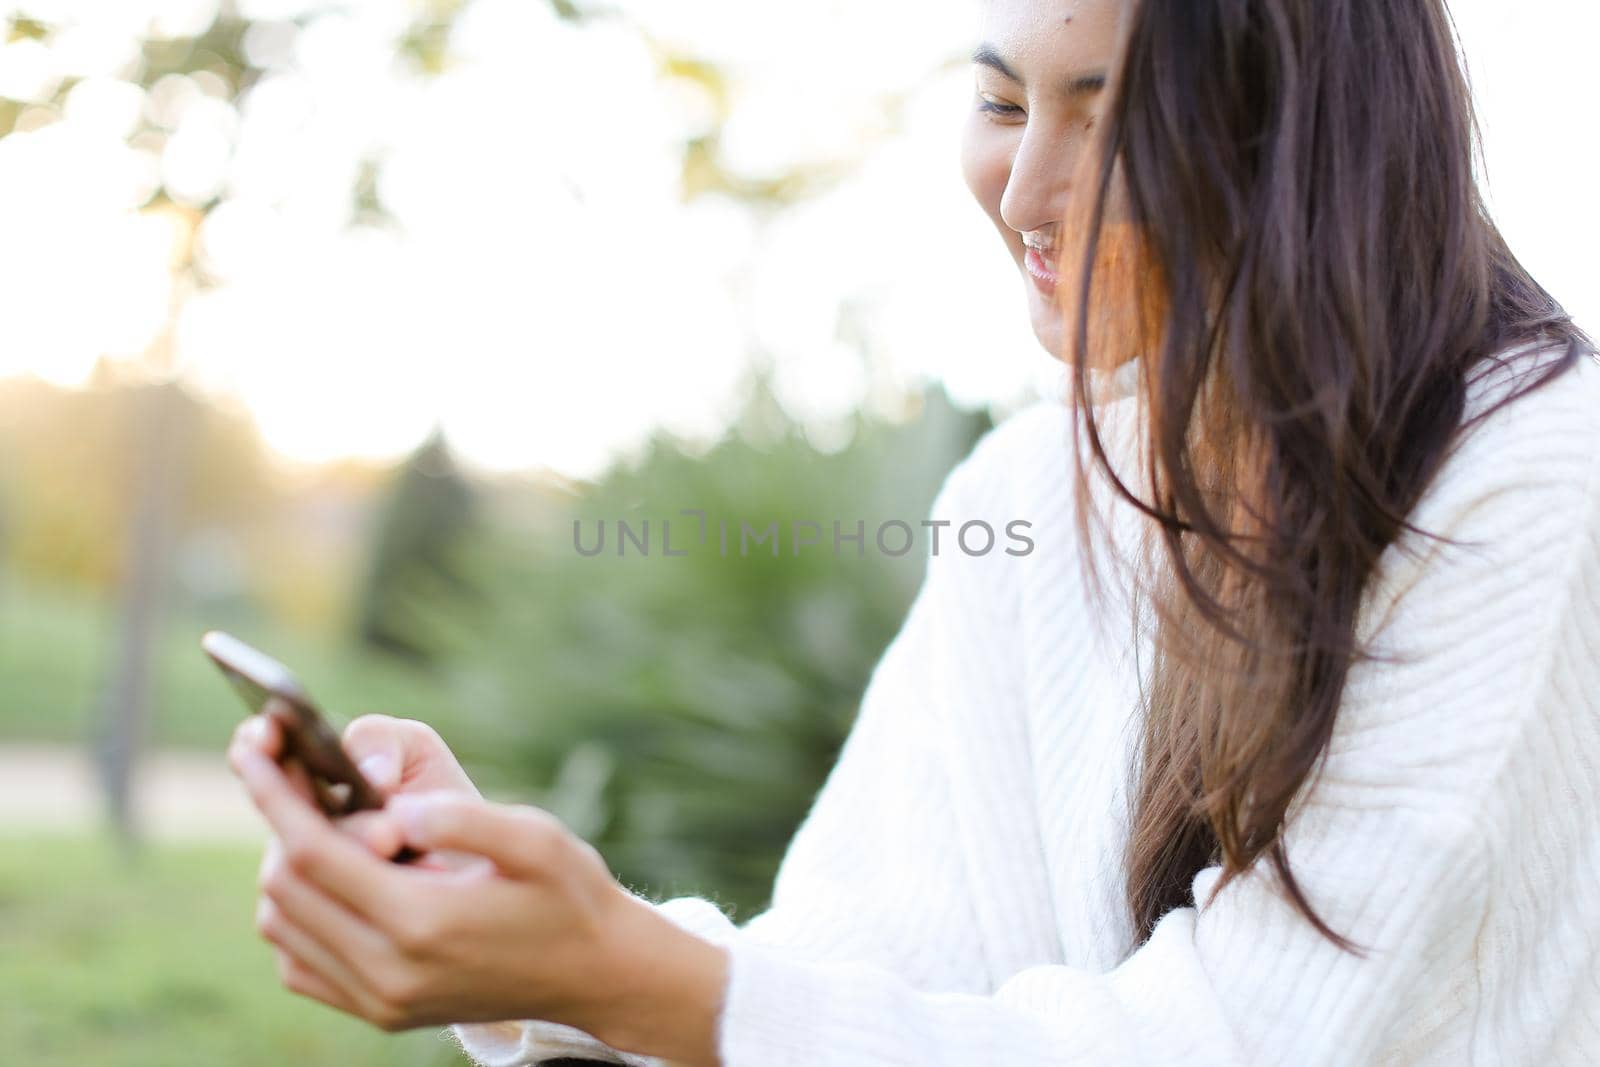 Focus on chinese girl keeping smartphone and smiling. by sisterspro